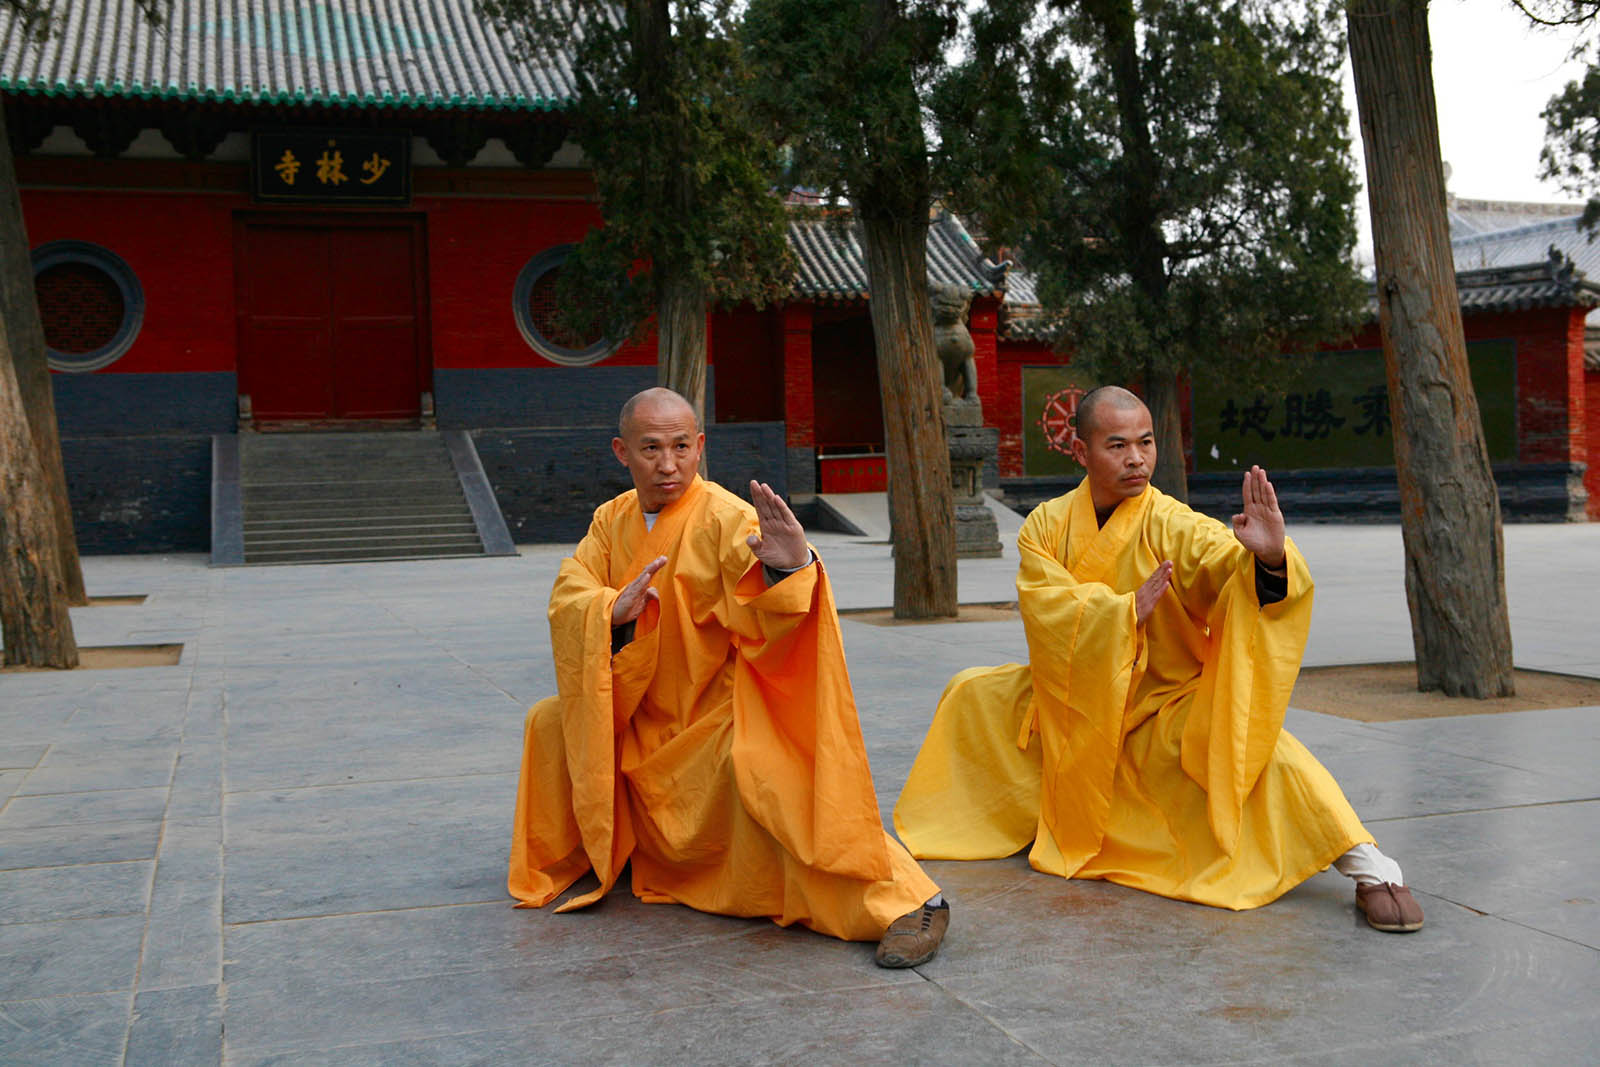 sitting meditation preparation by way of martial arts training performed by 2 monks